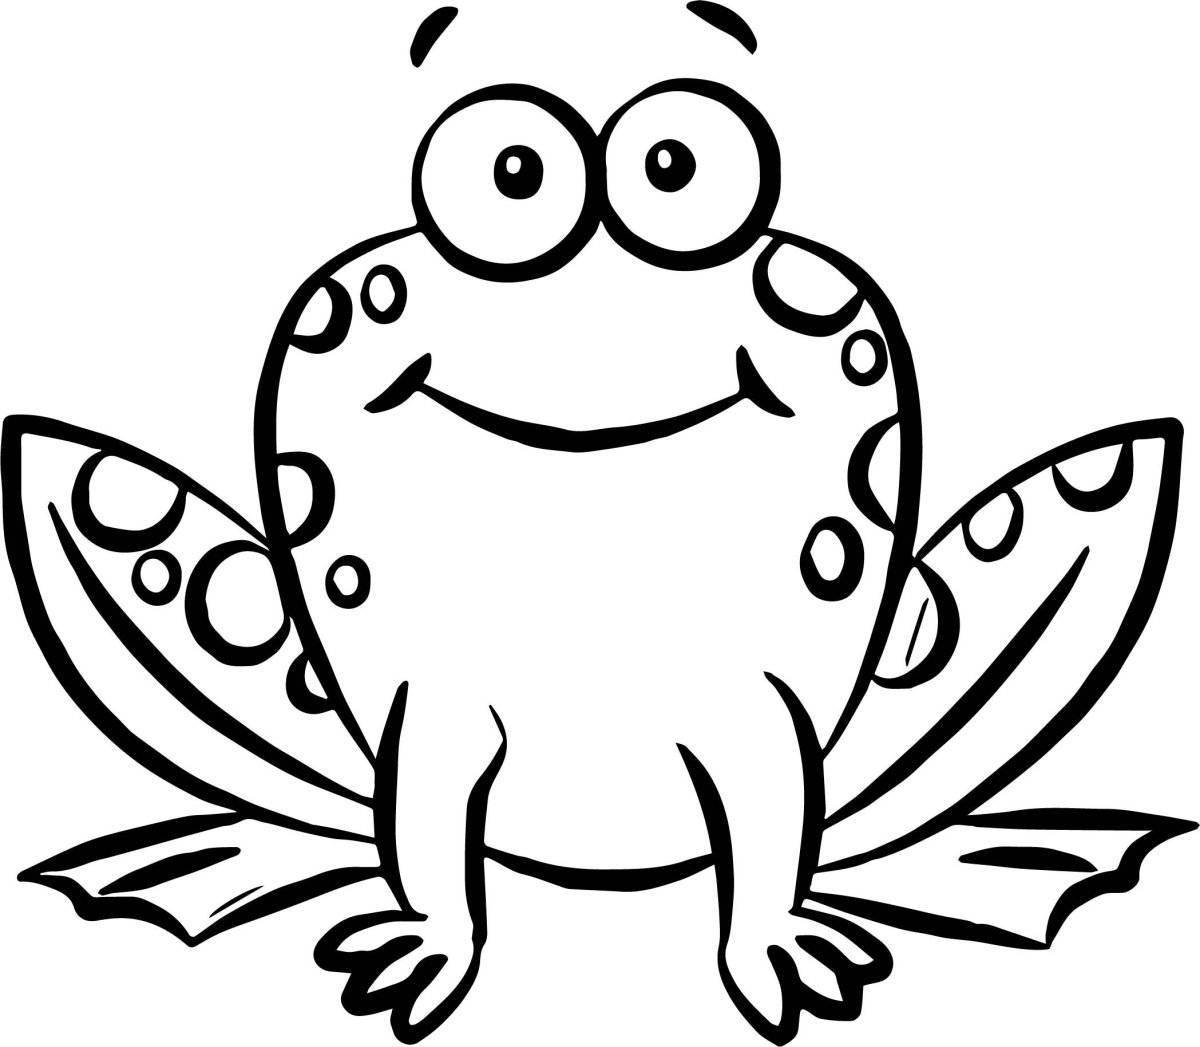 Fun coloring frog for children 3-4 years old